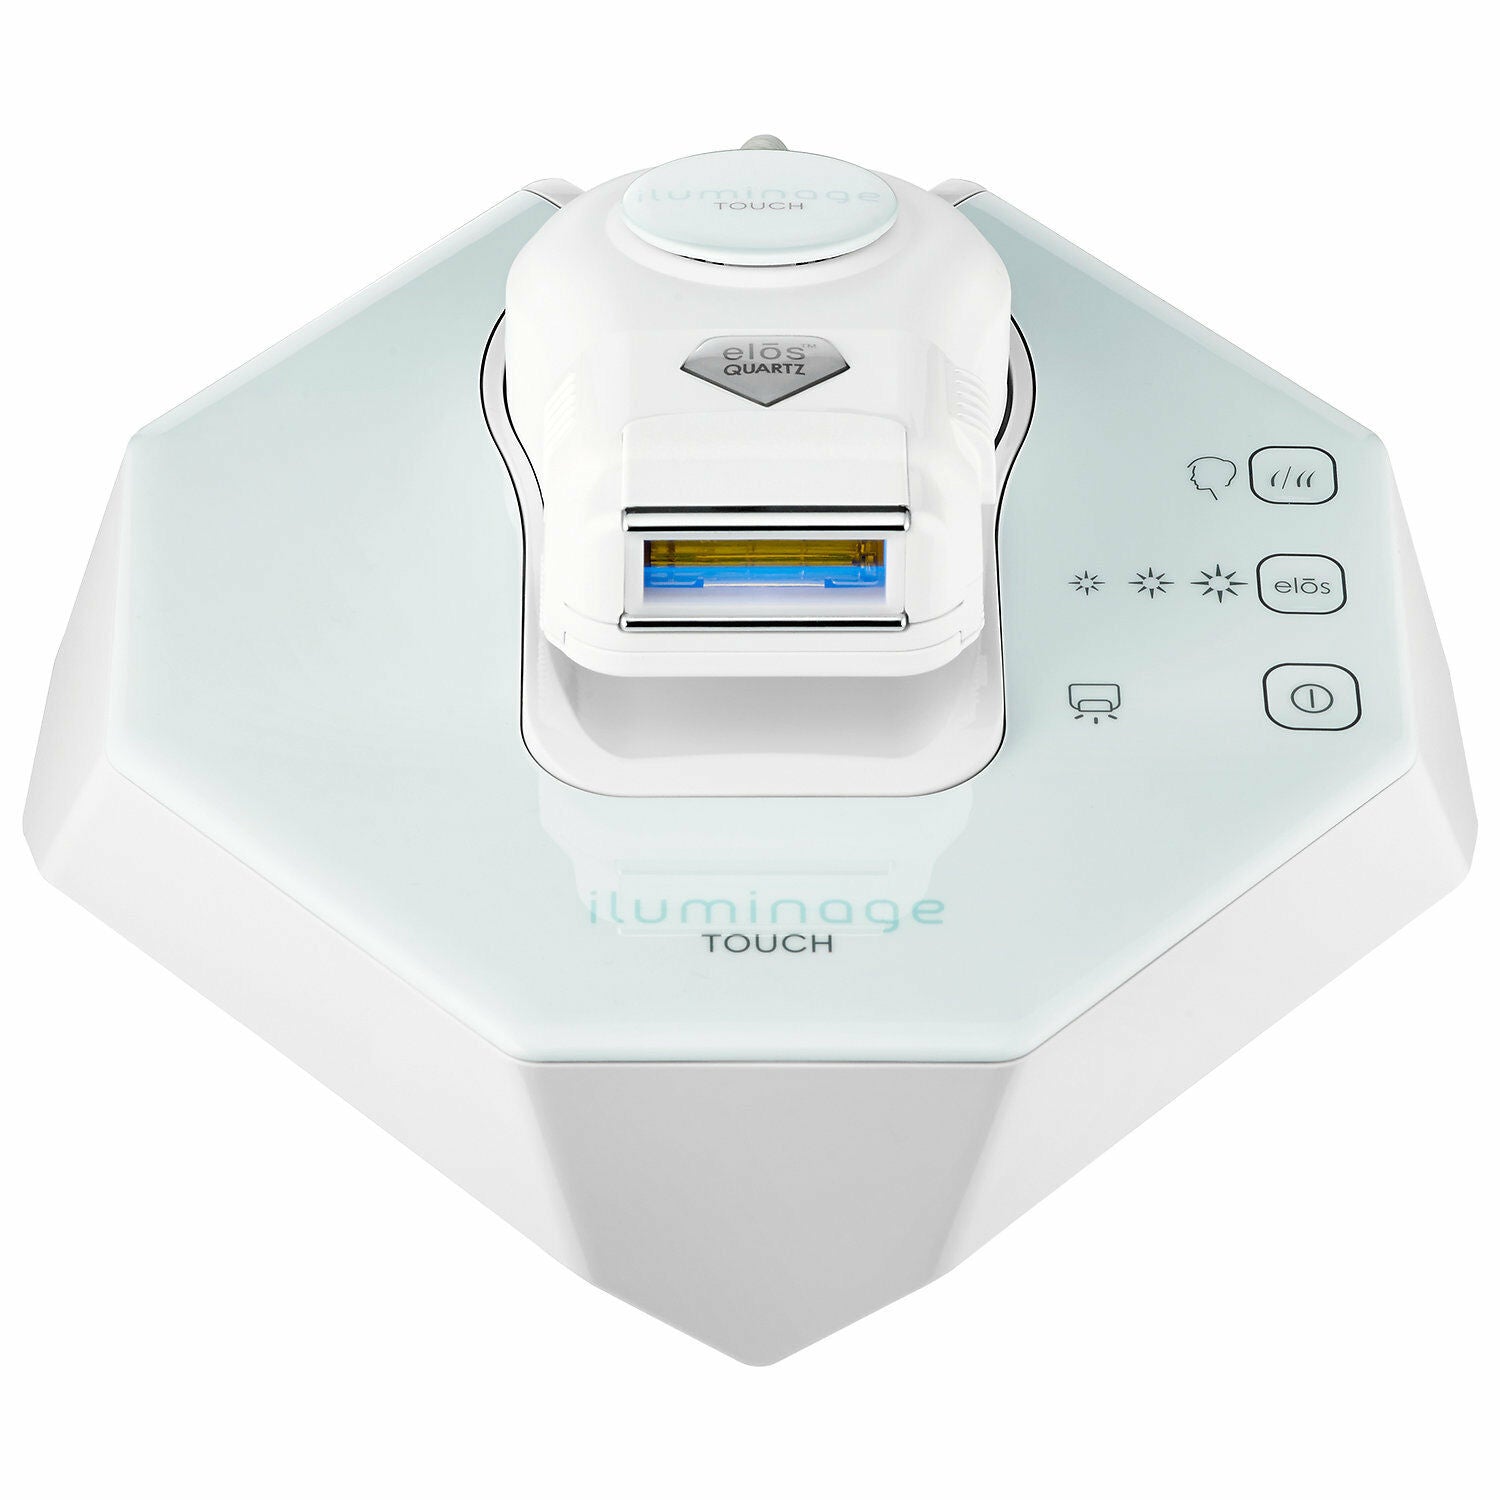 iluminage Touch 4ever Home Permanent Hair Removal IPL & Radio Frequency System (FDA-Cleared)